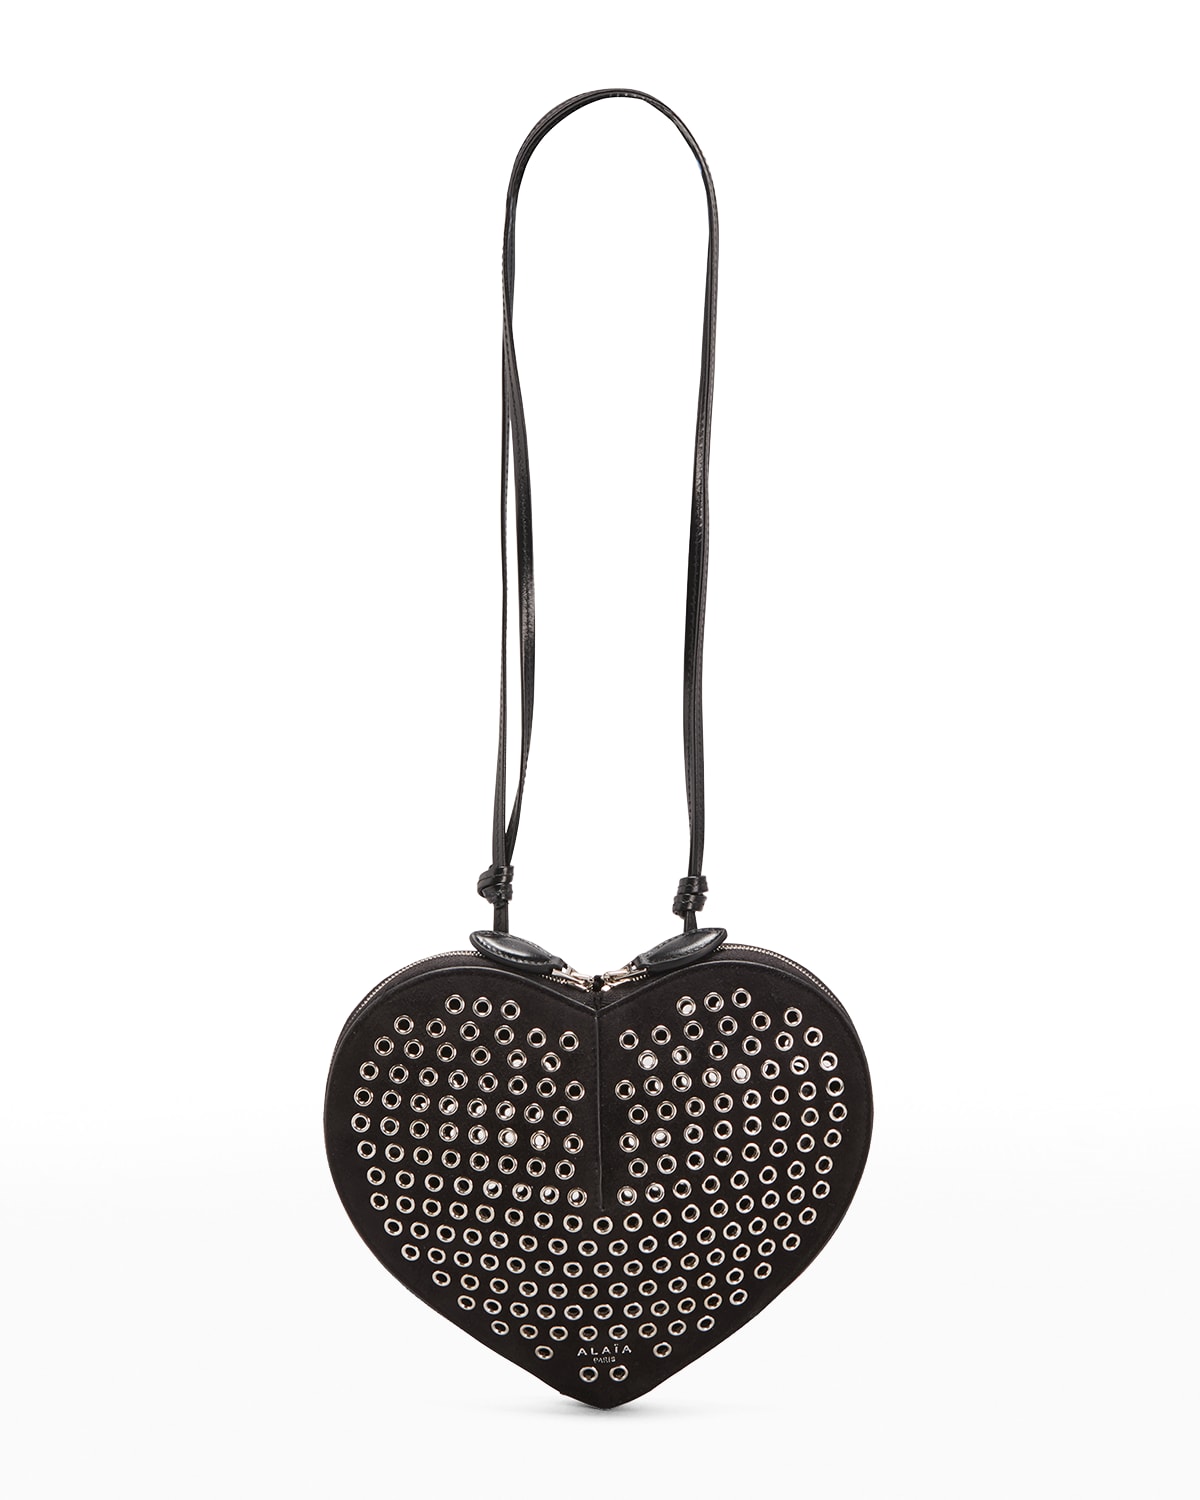 Le Coeur Crossbody Bag in Lux Leather with Grommets